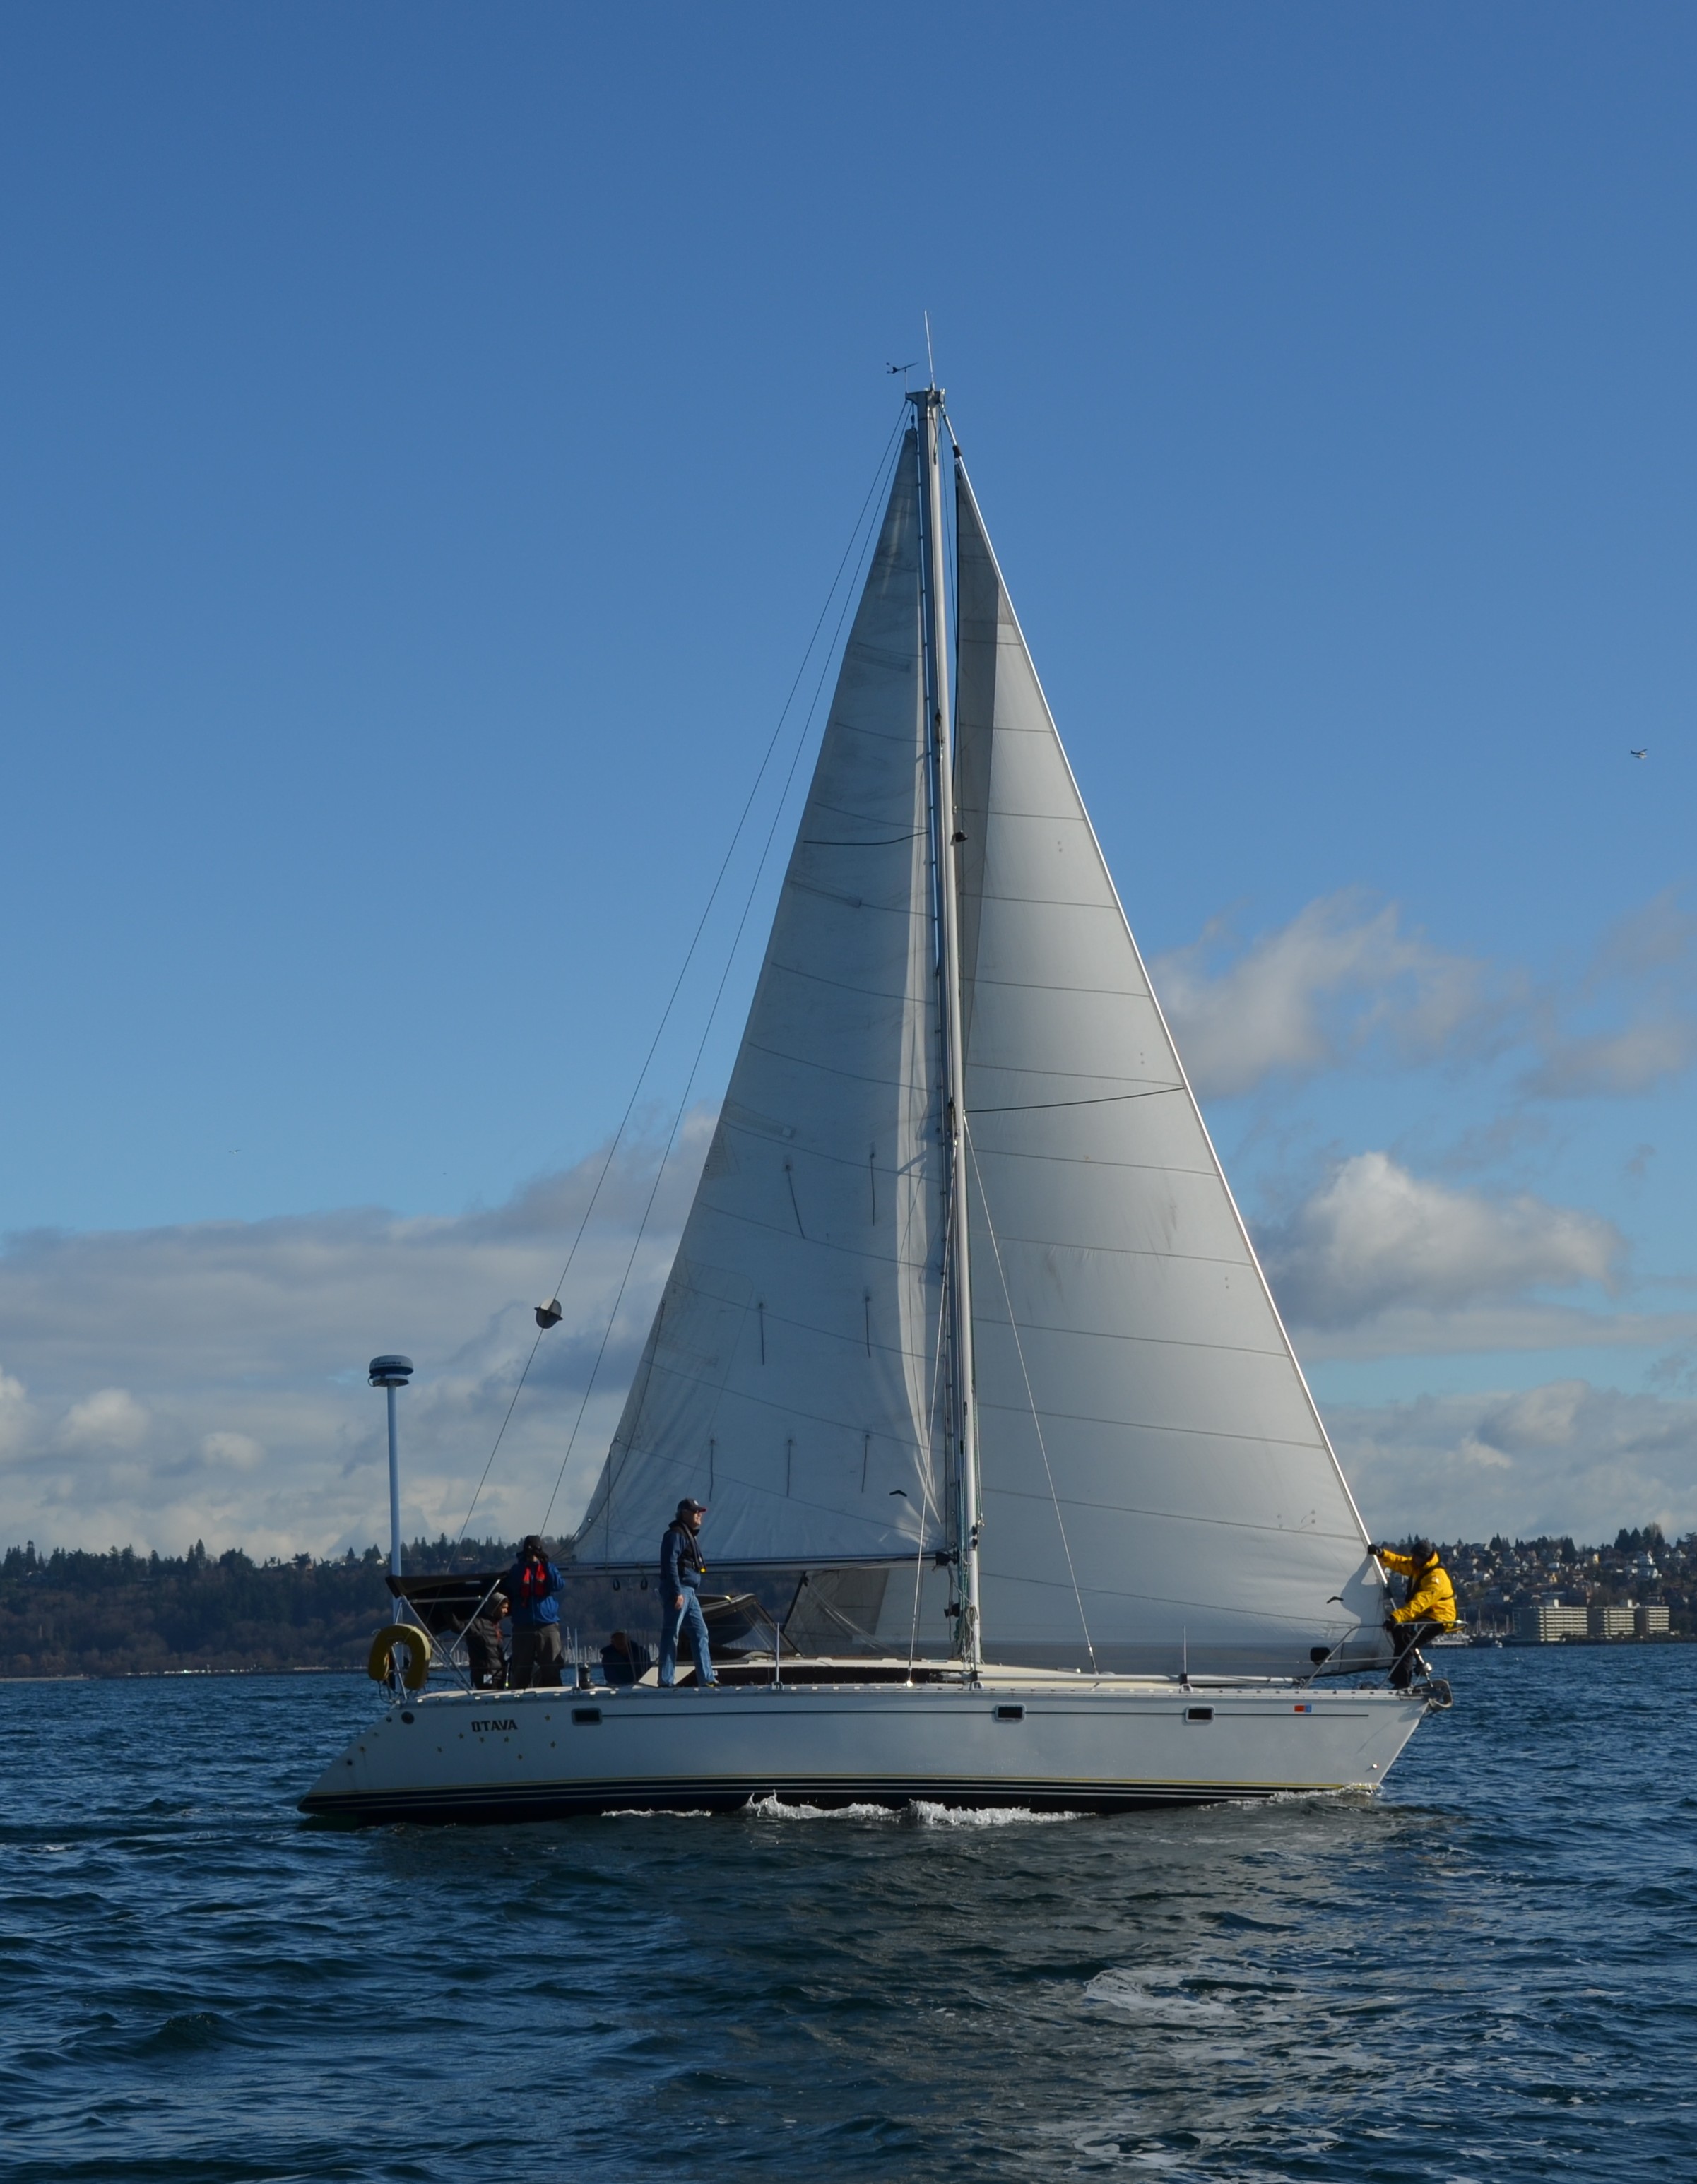 sailboats in seattle